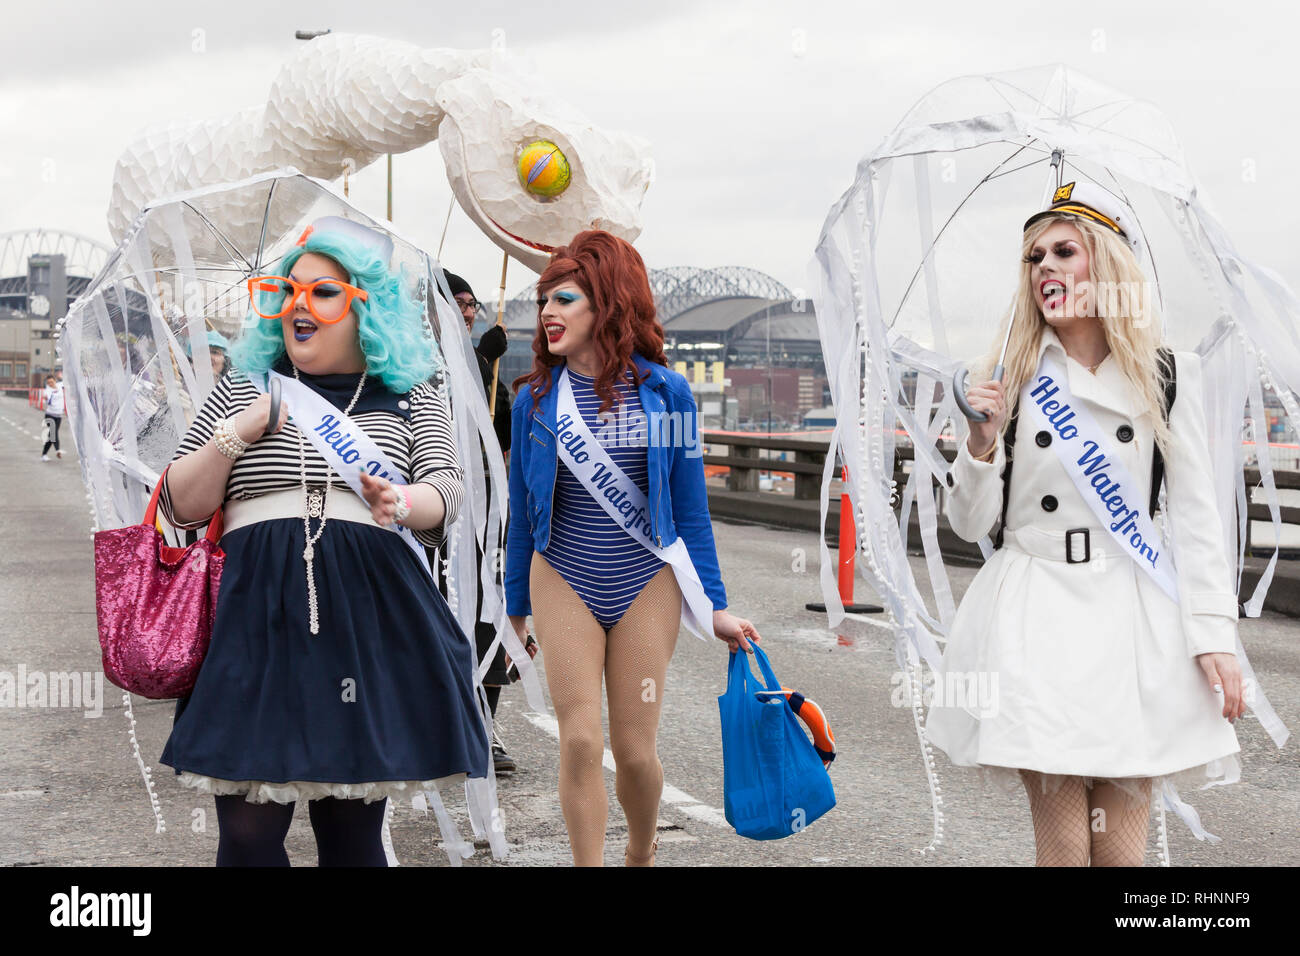 Seattle, Washington, USA. 2nd February, 2019. The Hello/Goodbye Drag Queens walk in a procession along the closed Alaskan Way Viaduct. An estimated 70,000 people attended the Hello Goodbye: Viaduct Arts Festival as part of the grand opening of the state-of-the-art tunnel spanning two-miles under downtown. The festival, which took place on the elevated highway, began with a processional featuring music and performances from regional artists and organizations. Credit: Paul Christian Gordon/Alamy Live News Stock Photo